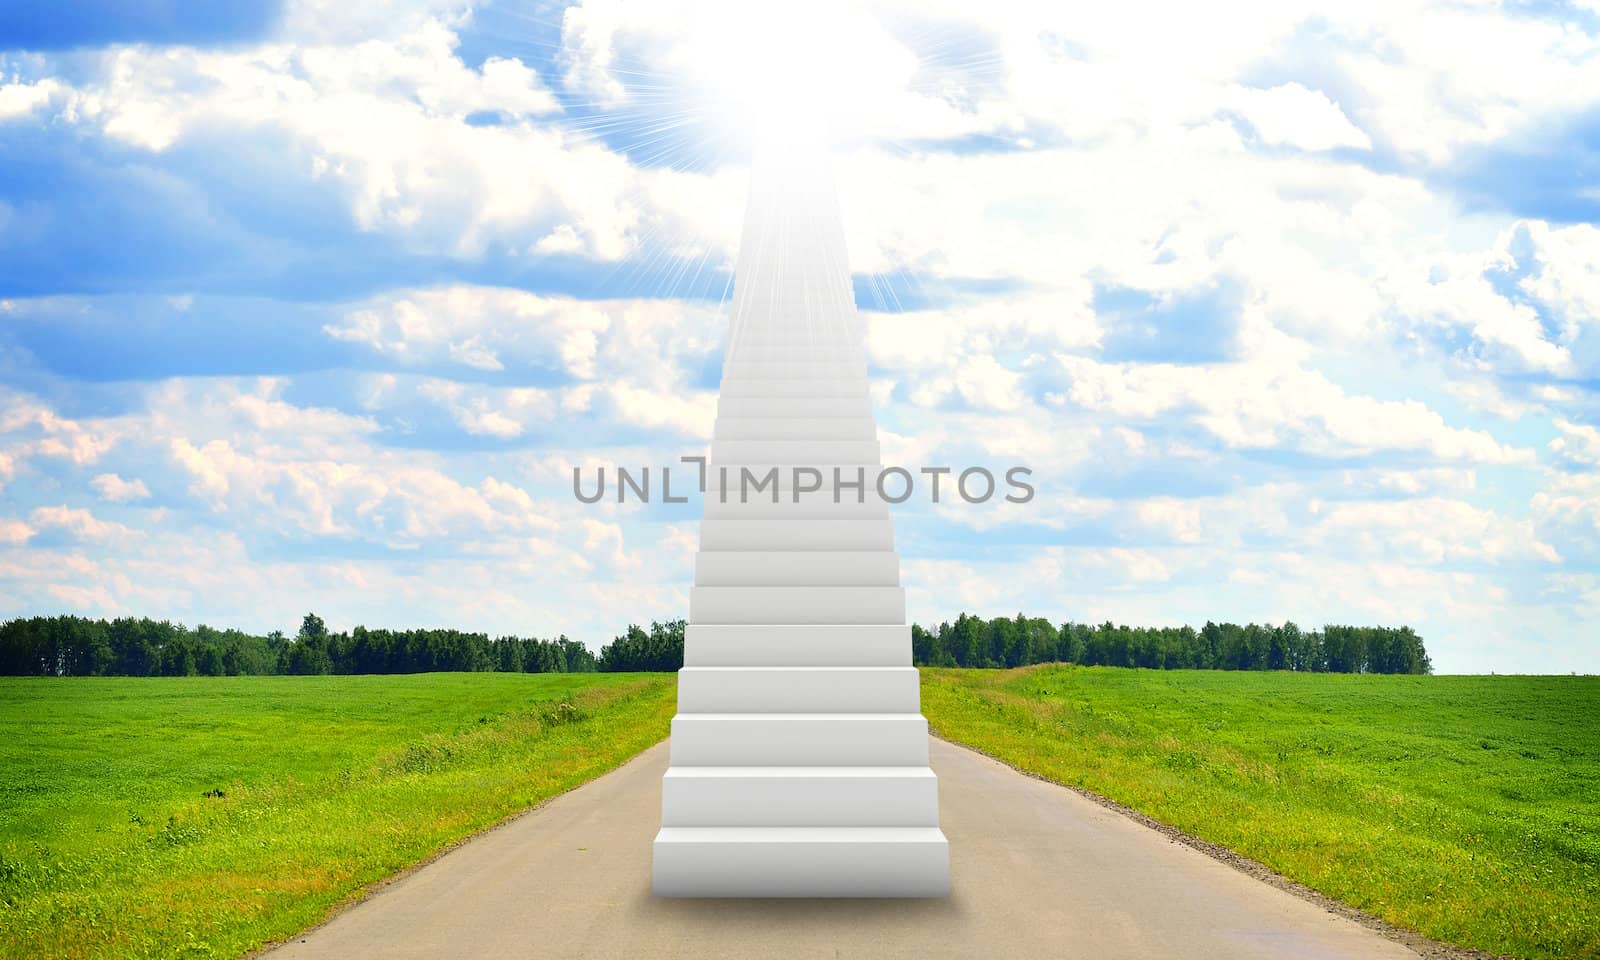 Stairs in sky with green grass, road and clouds. Concept background